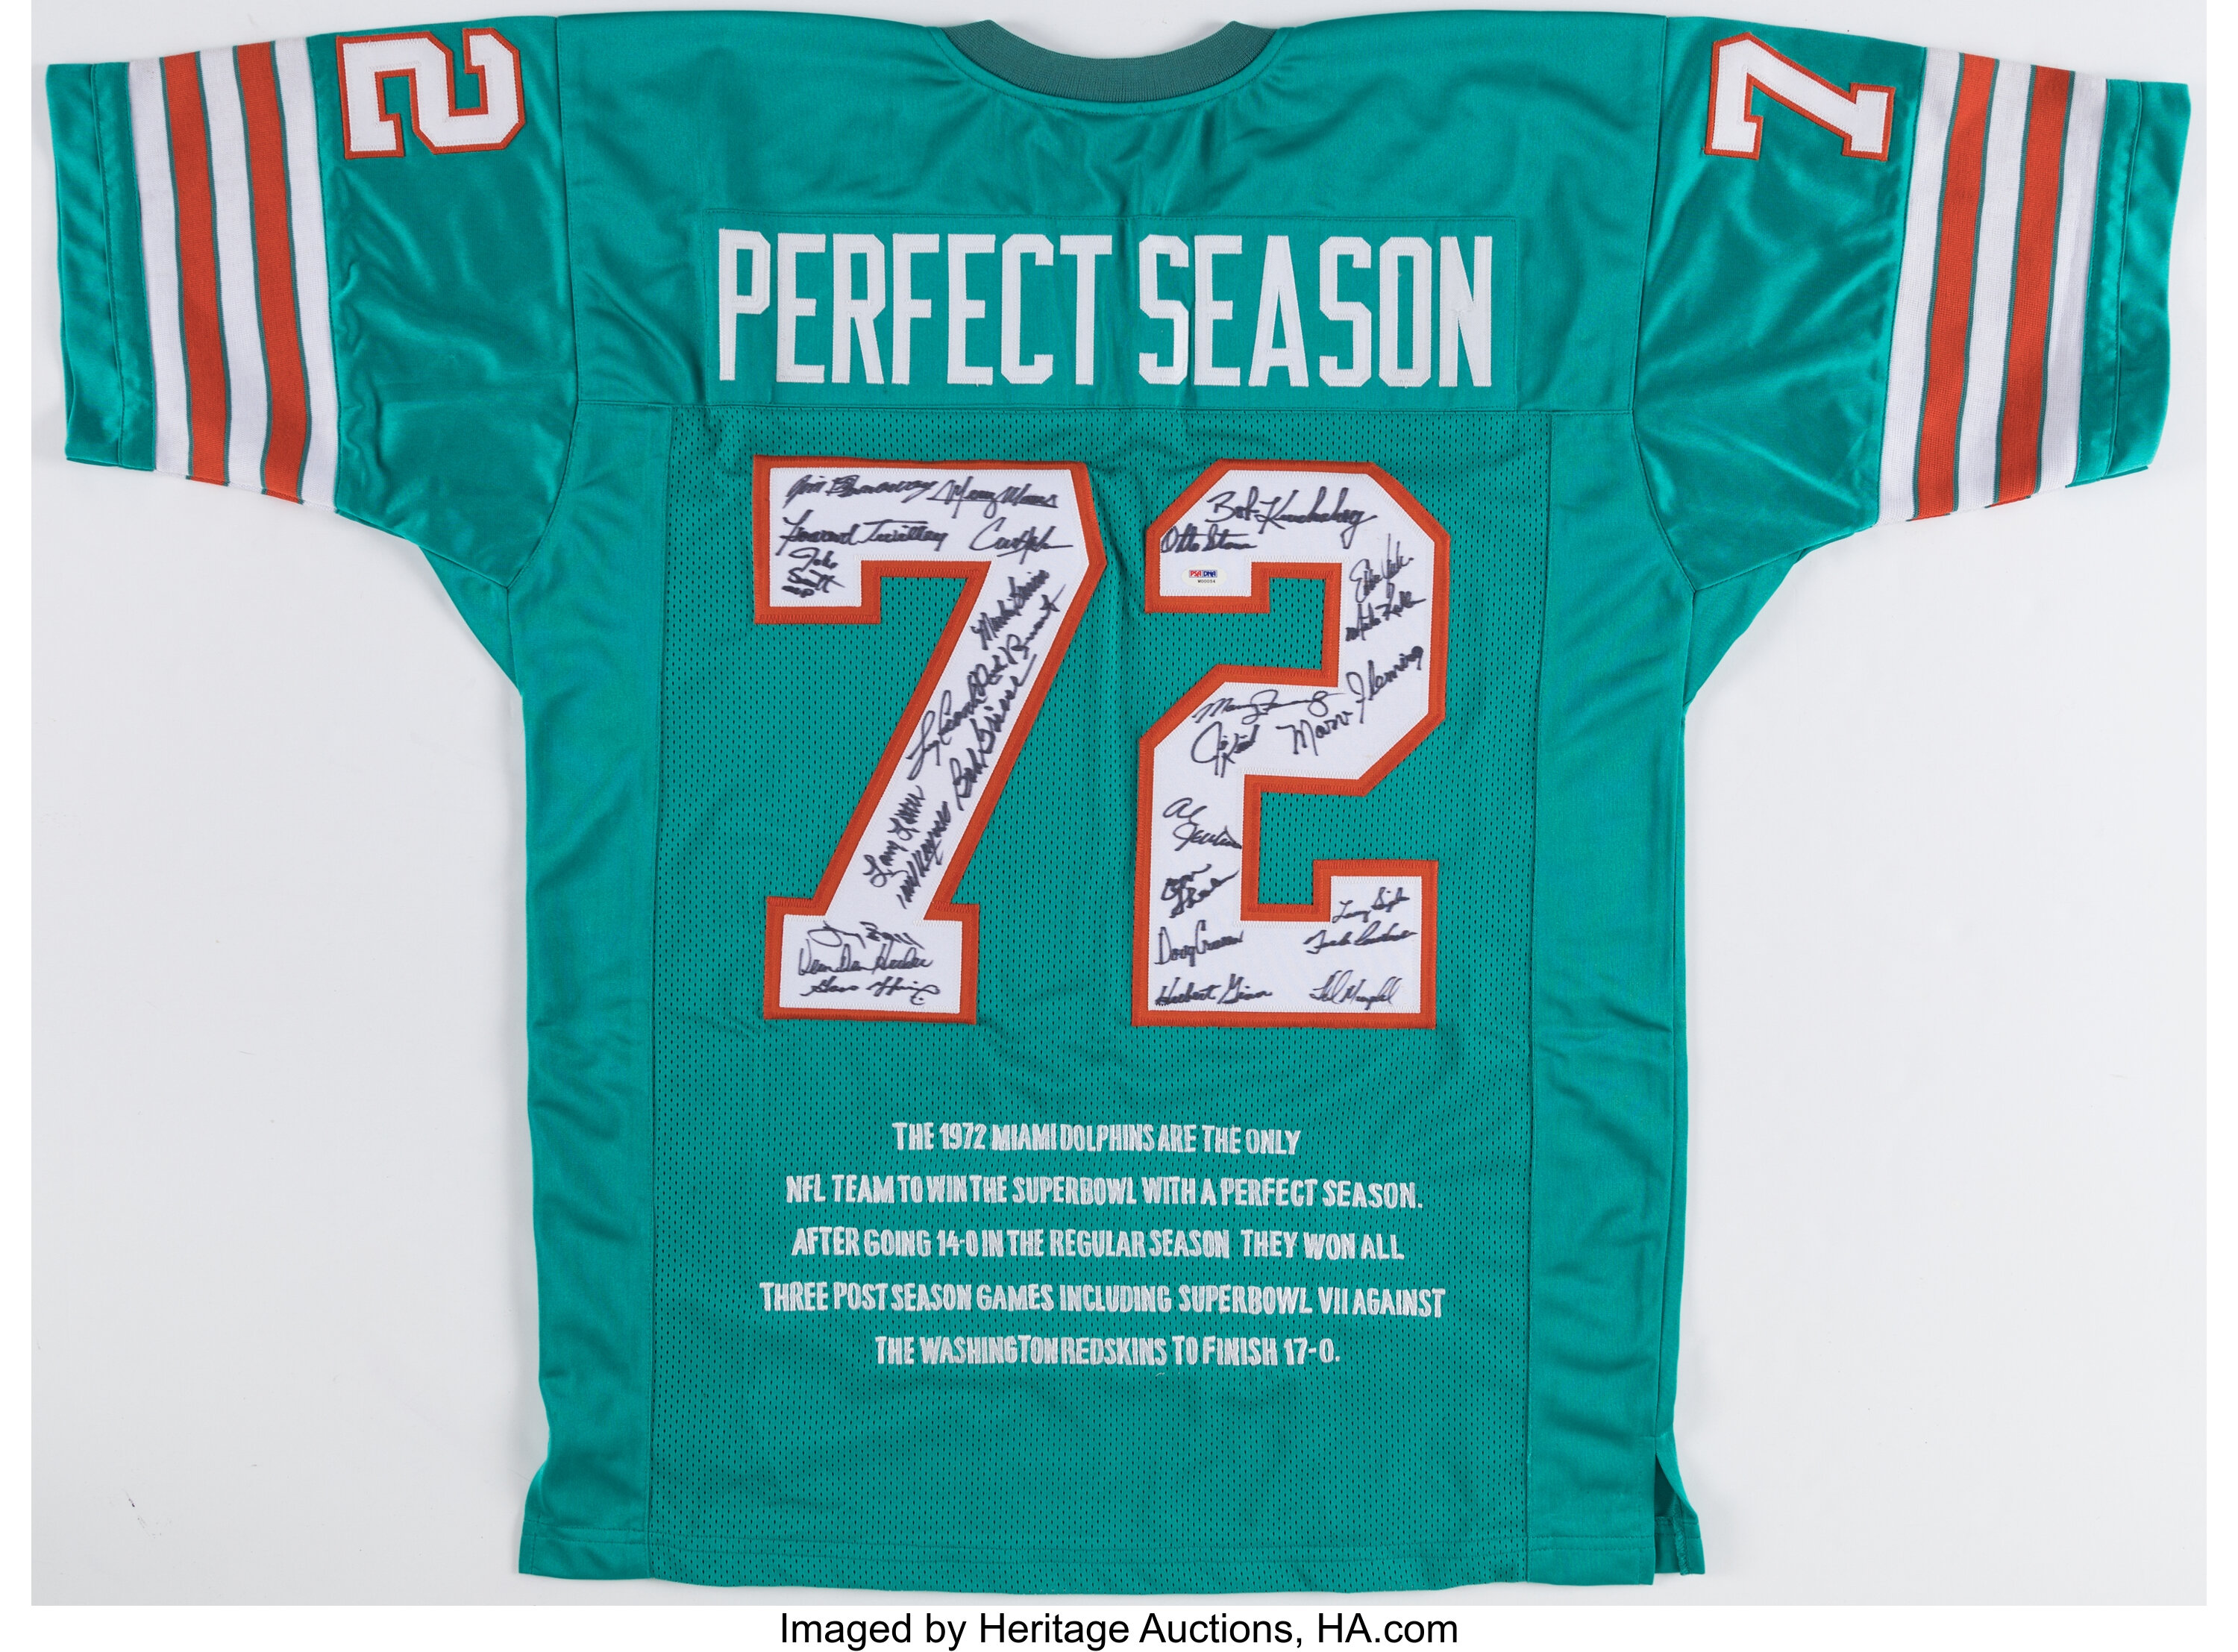 Miami Dolphins NFL Undefeated Season 1972 Baseball Jersey Gift For